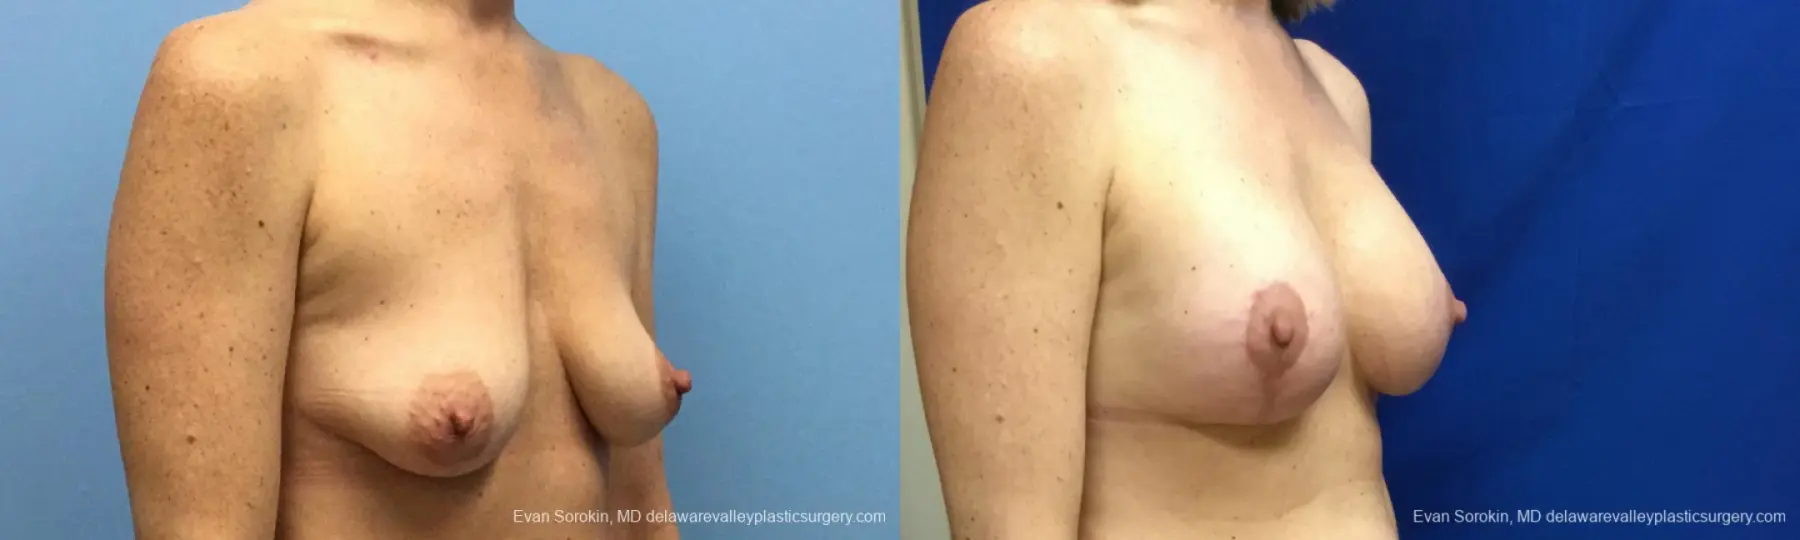 Philadelphia Breast Lift and Augmentation 10814 - Before and After 2